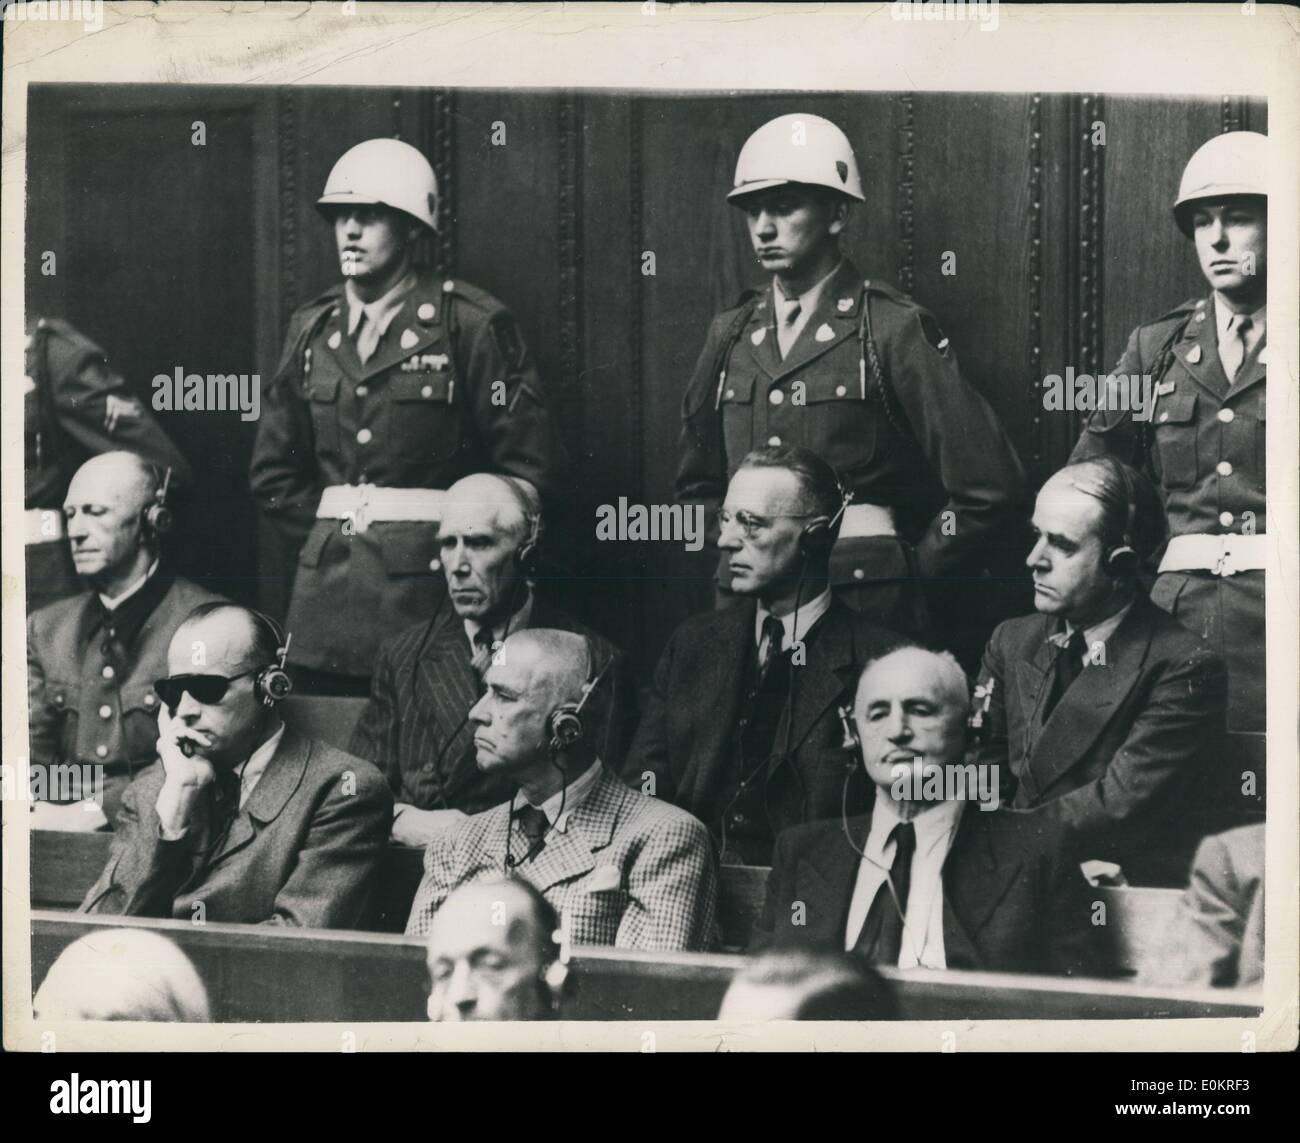 Sep. 09, 1946 - Judgement Day At Nuremberg Defendants Hear Verdict: Some of the chief defendants seen in the dock at Nuremberg Back now Left to Right Alfred Jodl, Franz Von Papen; Arthur Seys - Inquart; Albert Spee~. Front row Left to Right Erich Raeder; Wilhelm Frick and Julius Streicher.. They are listening to the verdict during the final stages of the greatest trial in history. Stock Photo